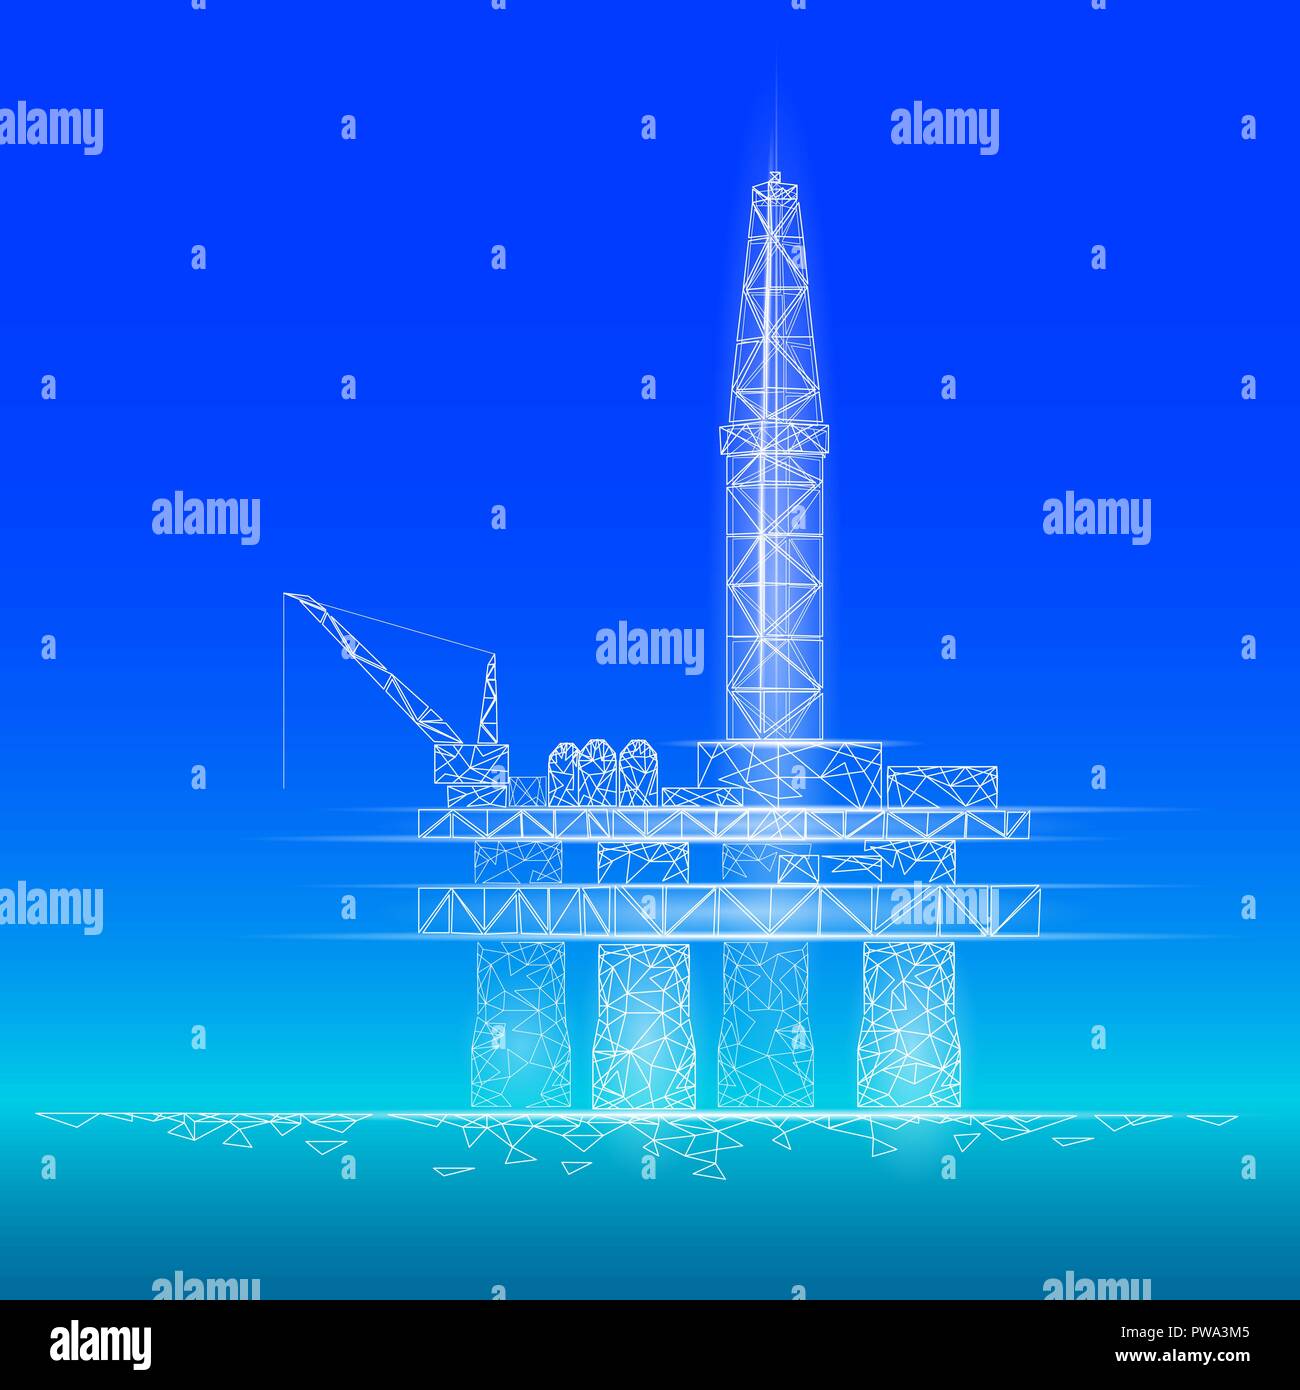 Ocean oil gas drilling rig low poly business concept. Finance economy polygonal petrol production. Petroleum fuel industry offshore extraction derricks line connection dots blue vector illustration Stock Vector